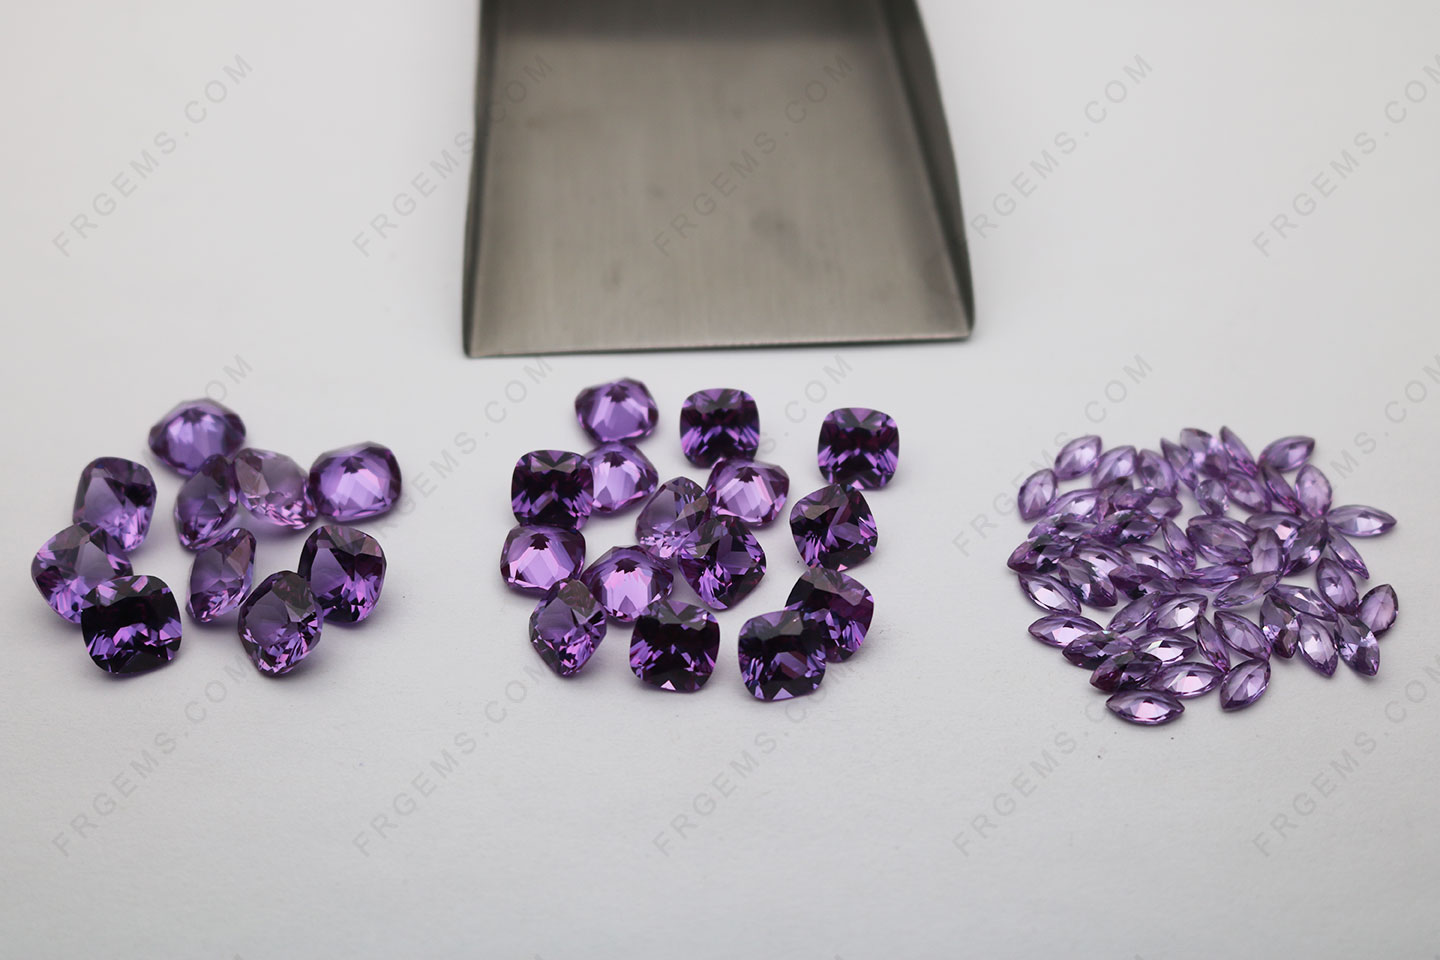 Wholesale Synthetic Alexandrite Color change Corundum 46# Cushion and Marquise shape faceted cut gemstones